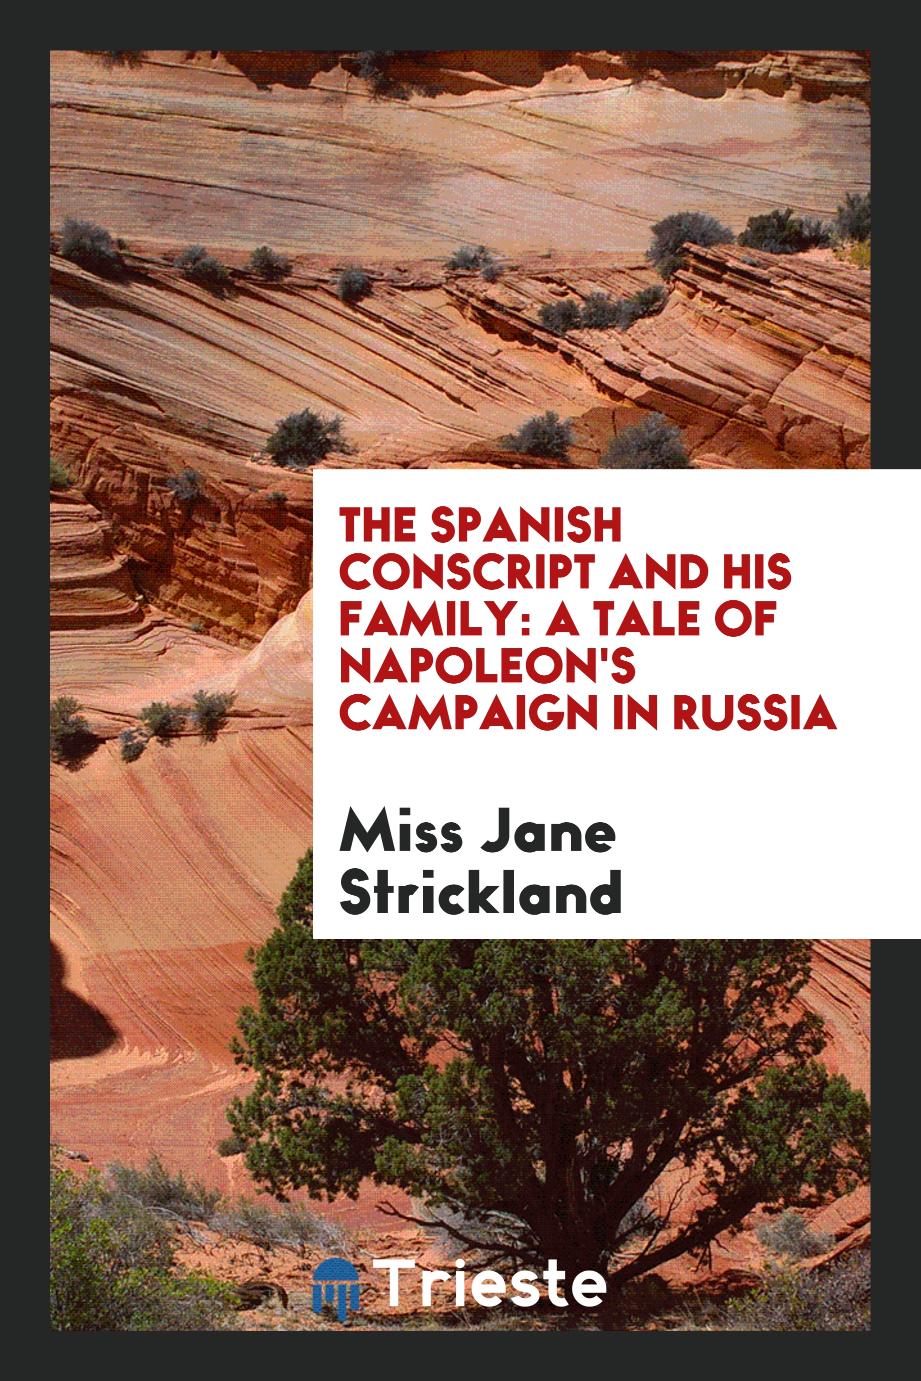 The Spanish Conscript and His Family: A Tale of Napoleon's Campaign in Russia